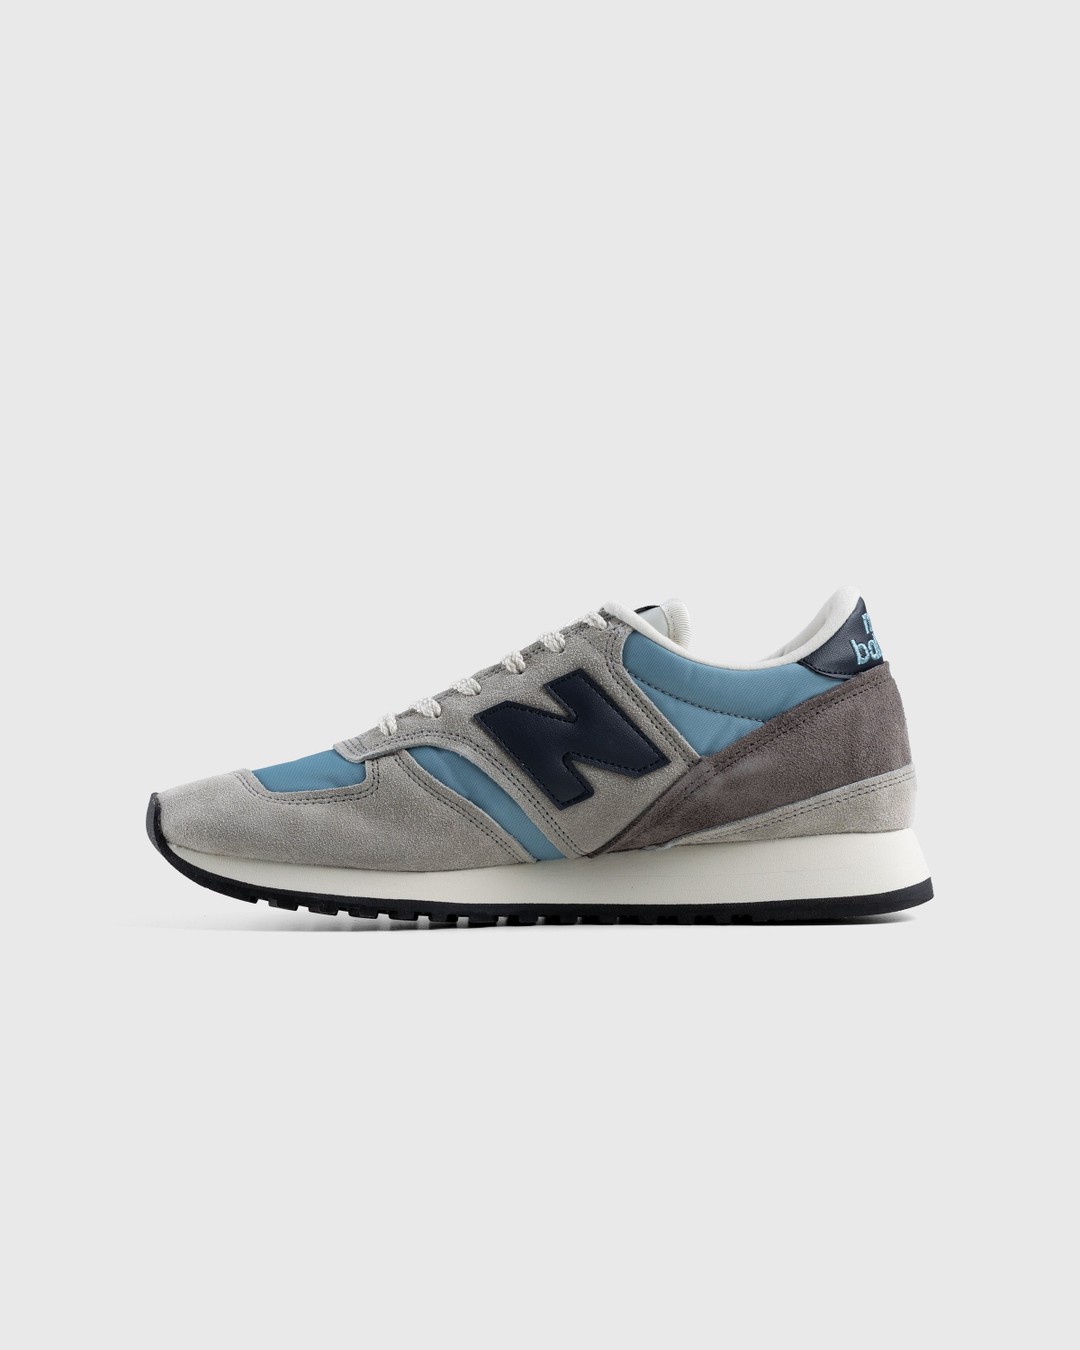 New Balance – M730GBN Grey/Blue - Sneakers - Grey - Image 2